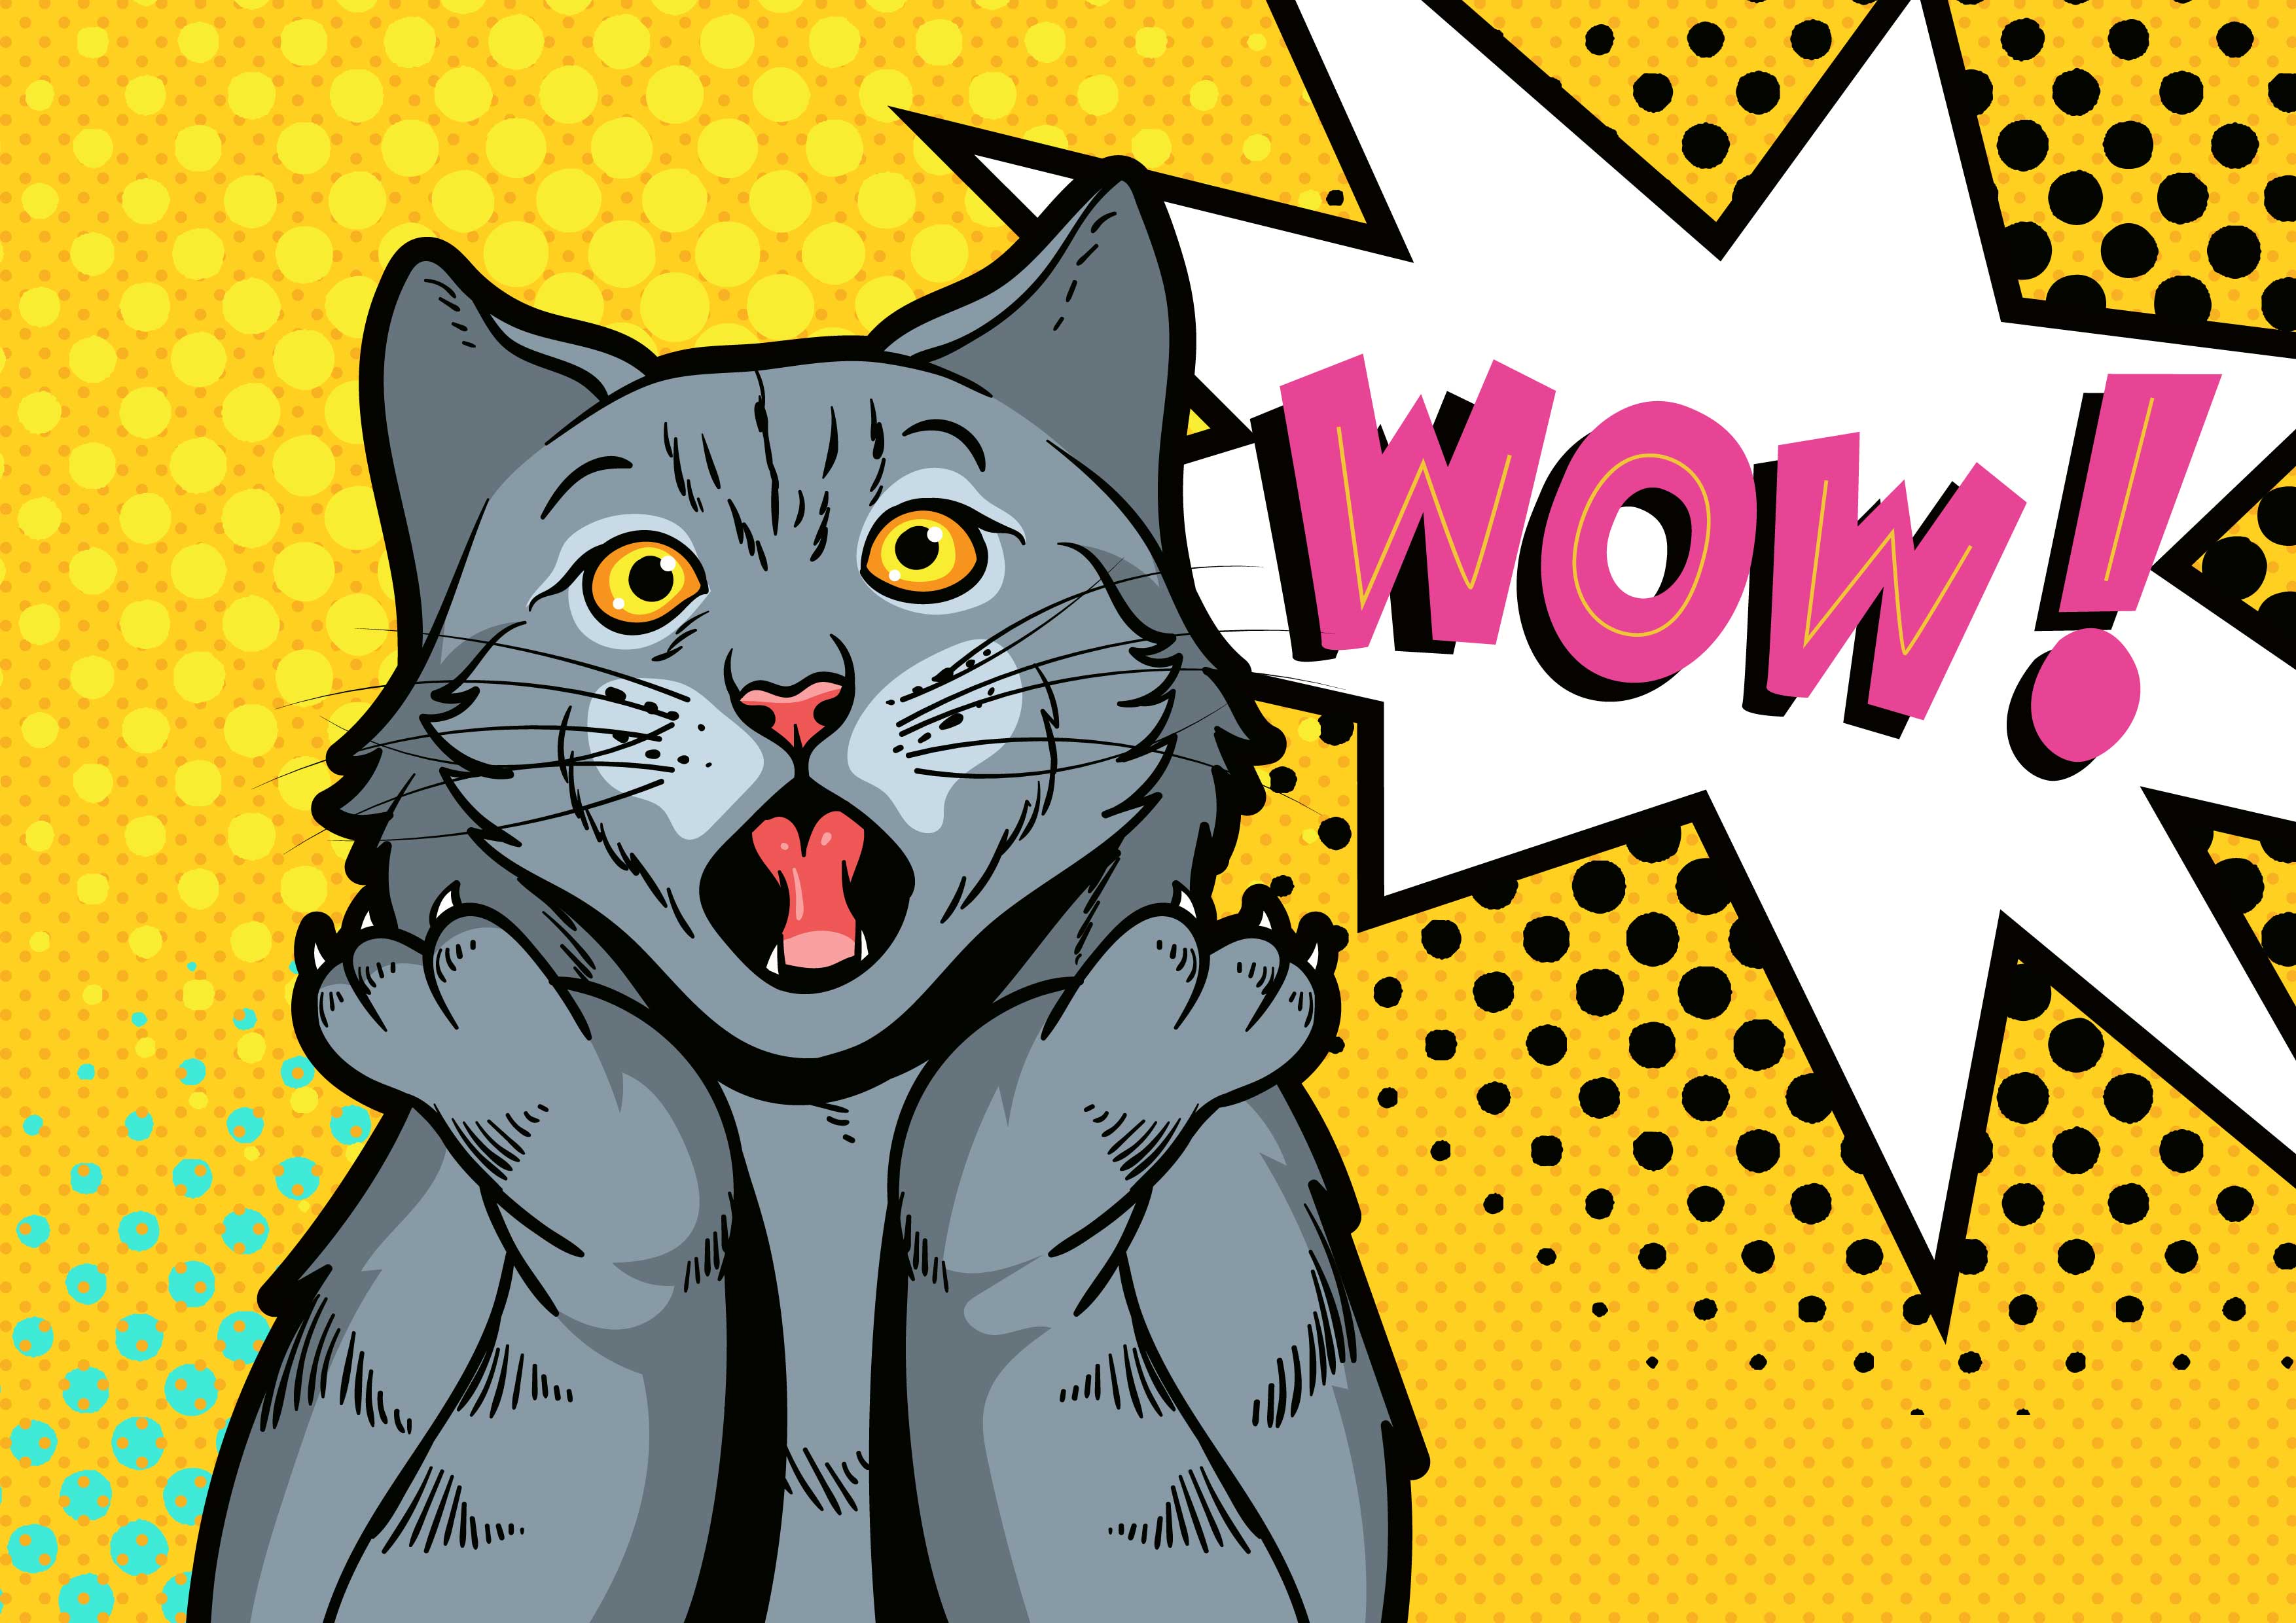 HD desktop wallpaper with a pop art style illustration featuring a surprised gray cat and a 'WOW!' speech bubble on a dotted yellow background.